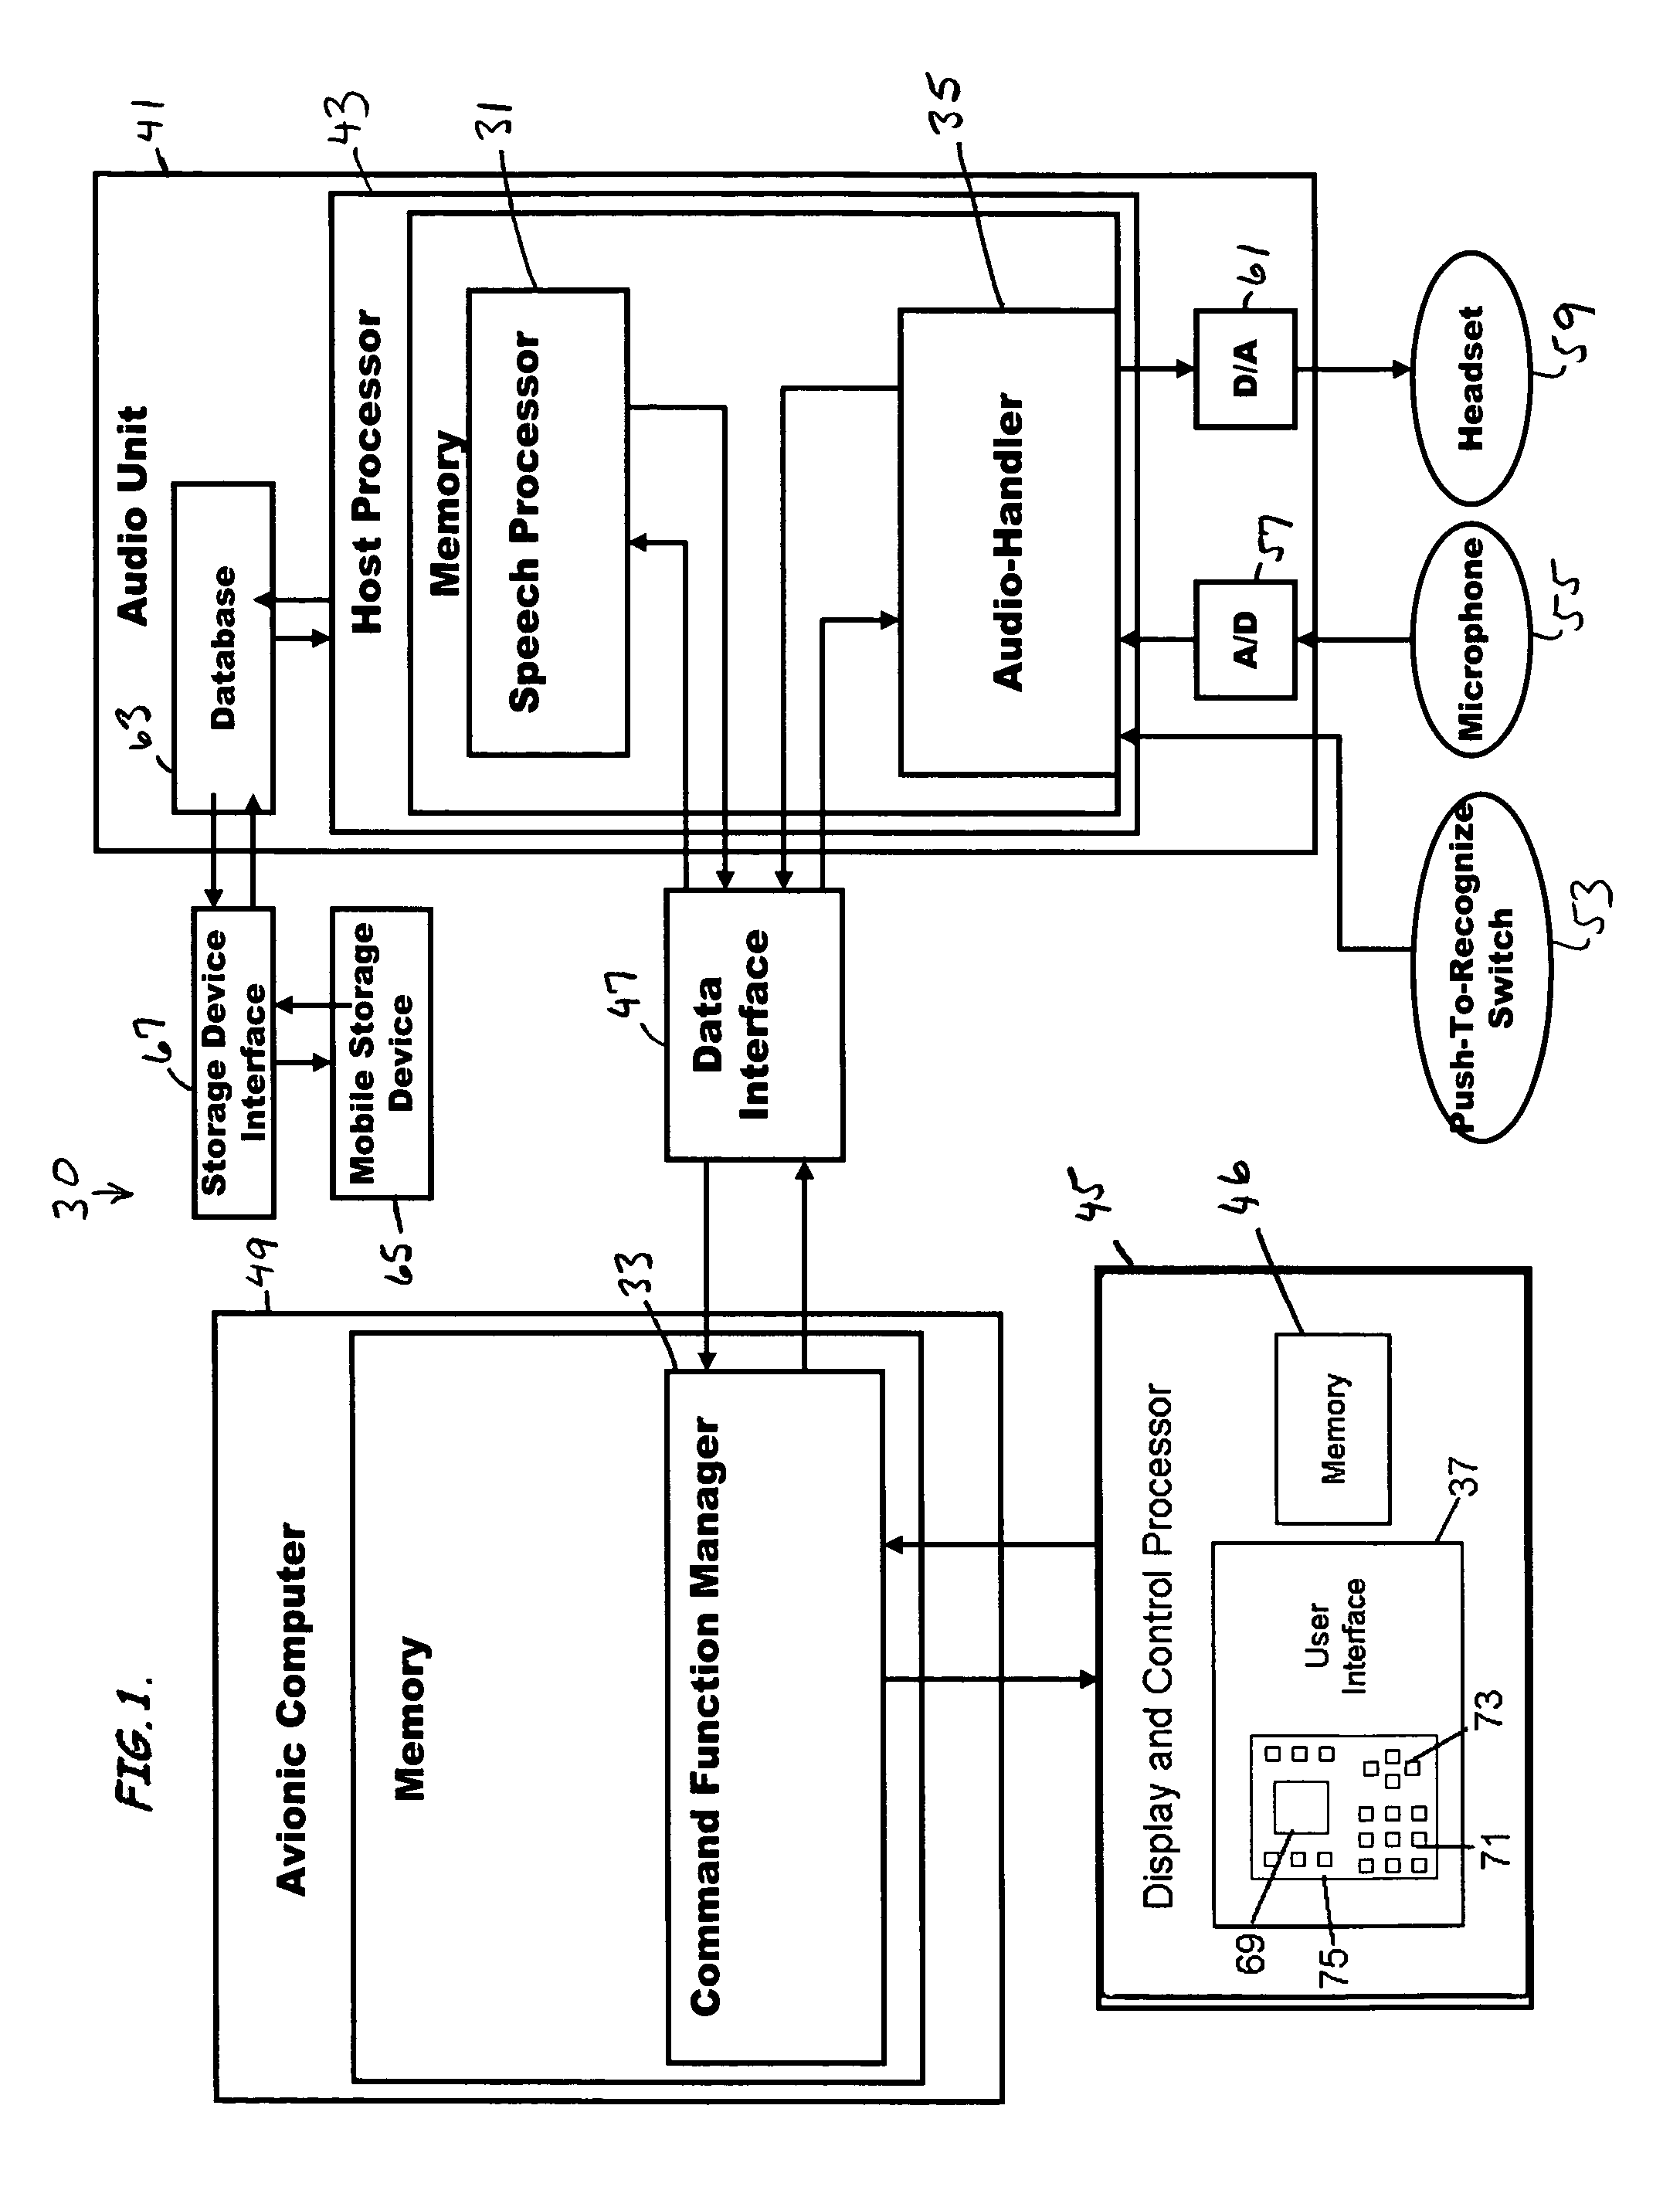 Speech recognition and control system, program product, and related methods